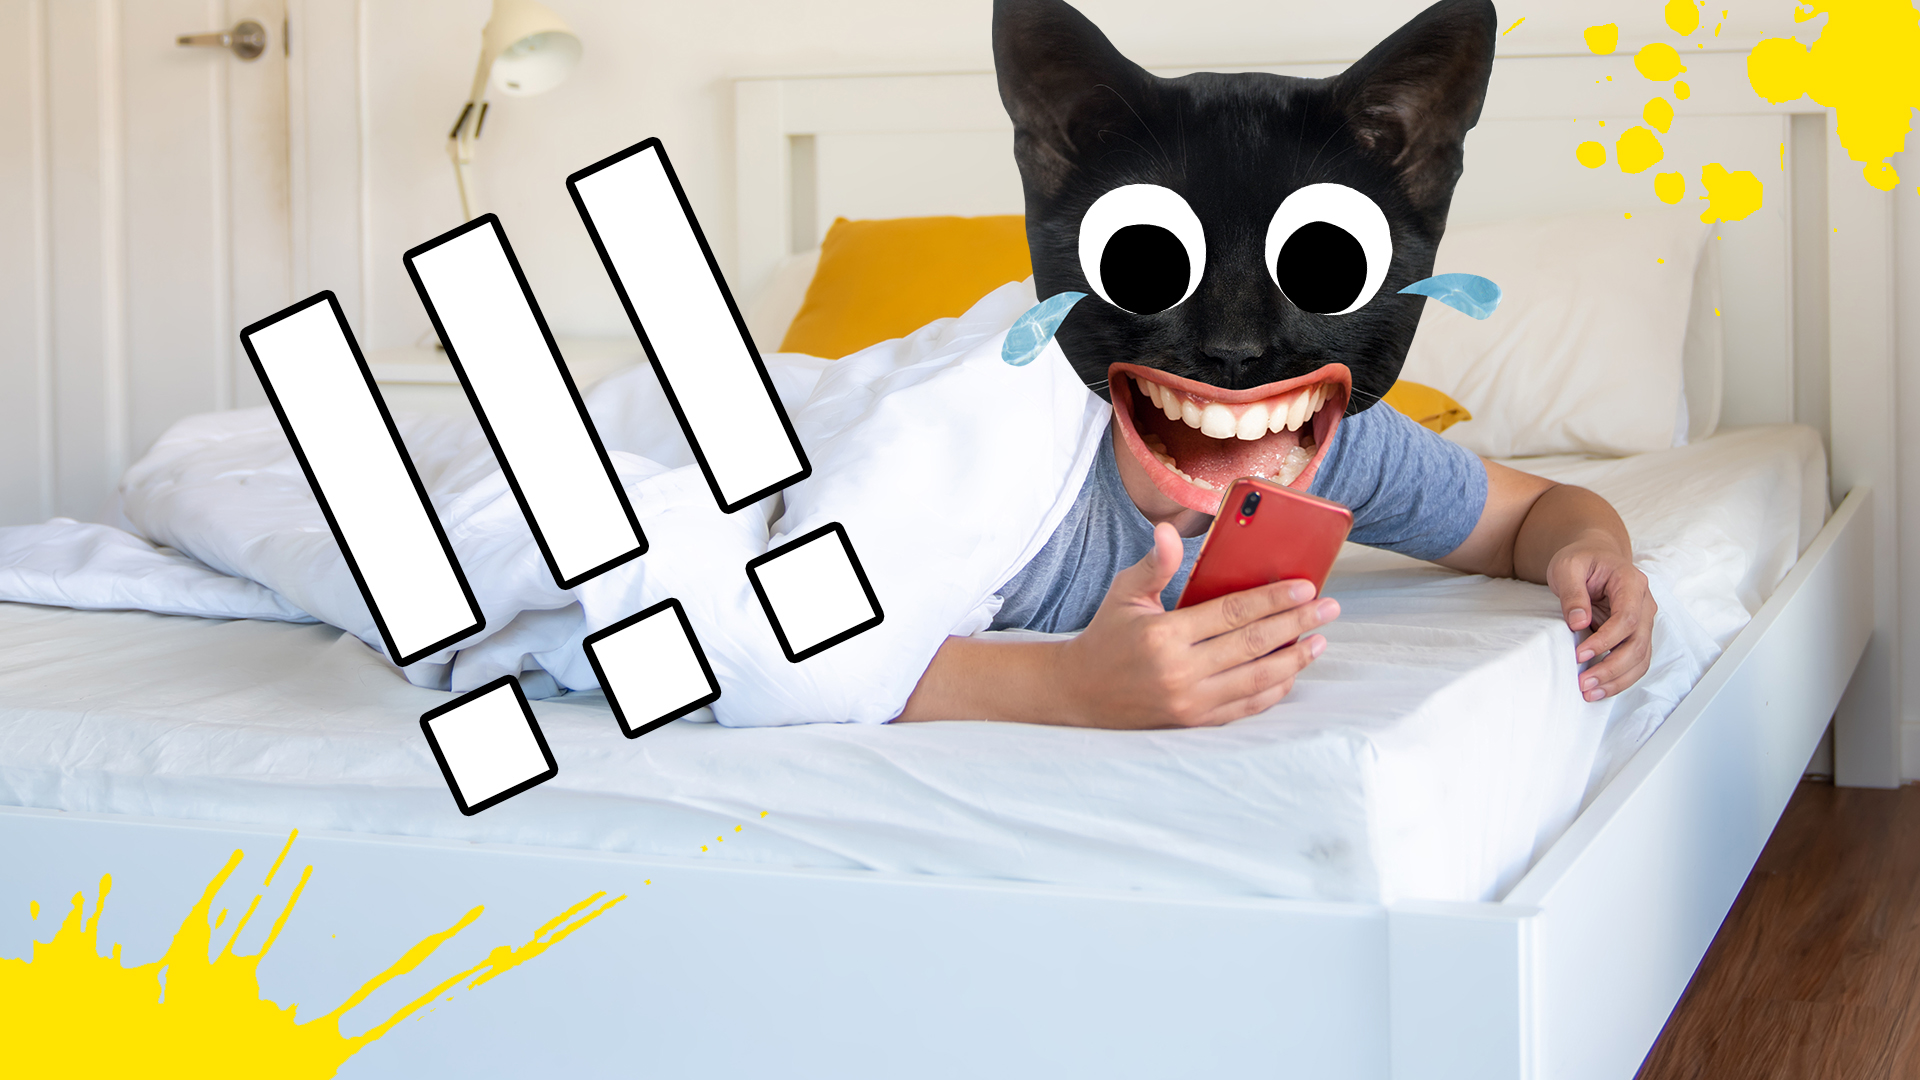 A cat is shocked by an alarm clock